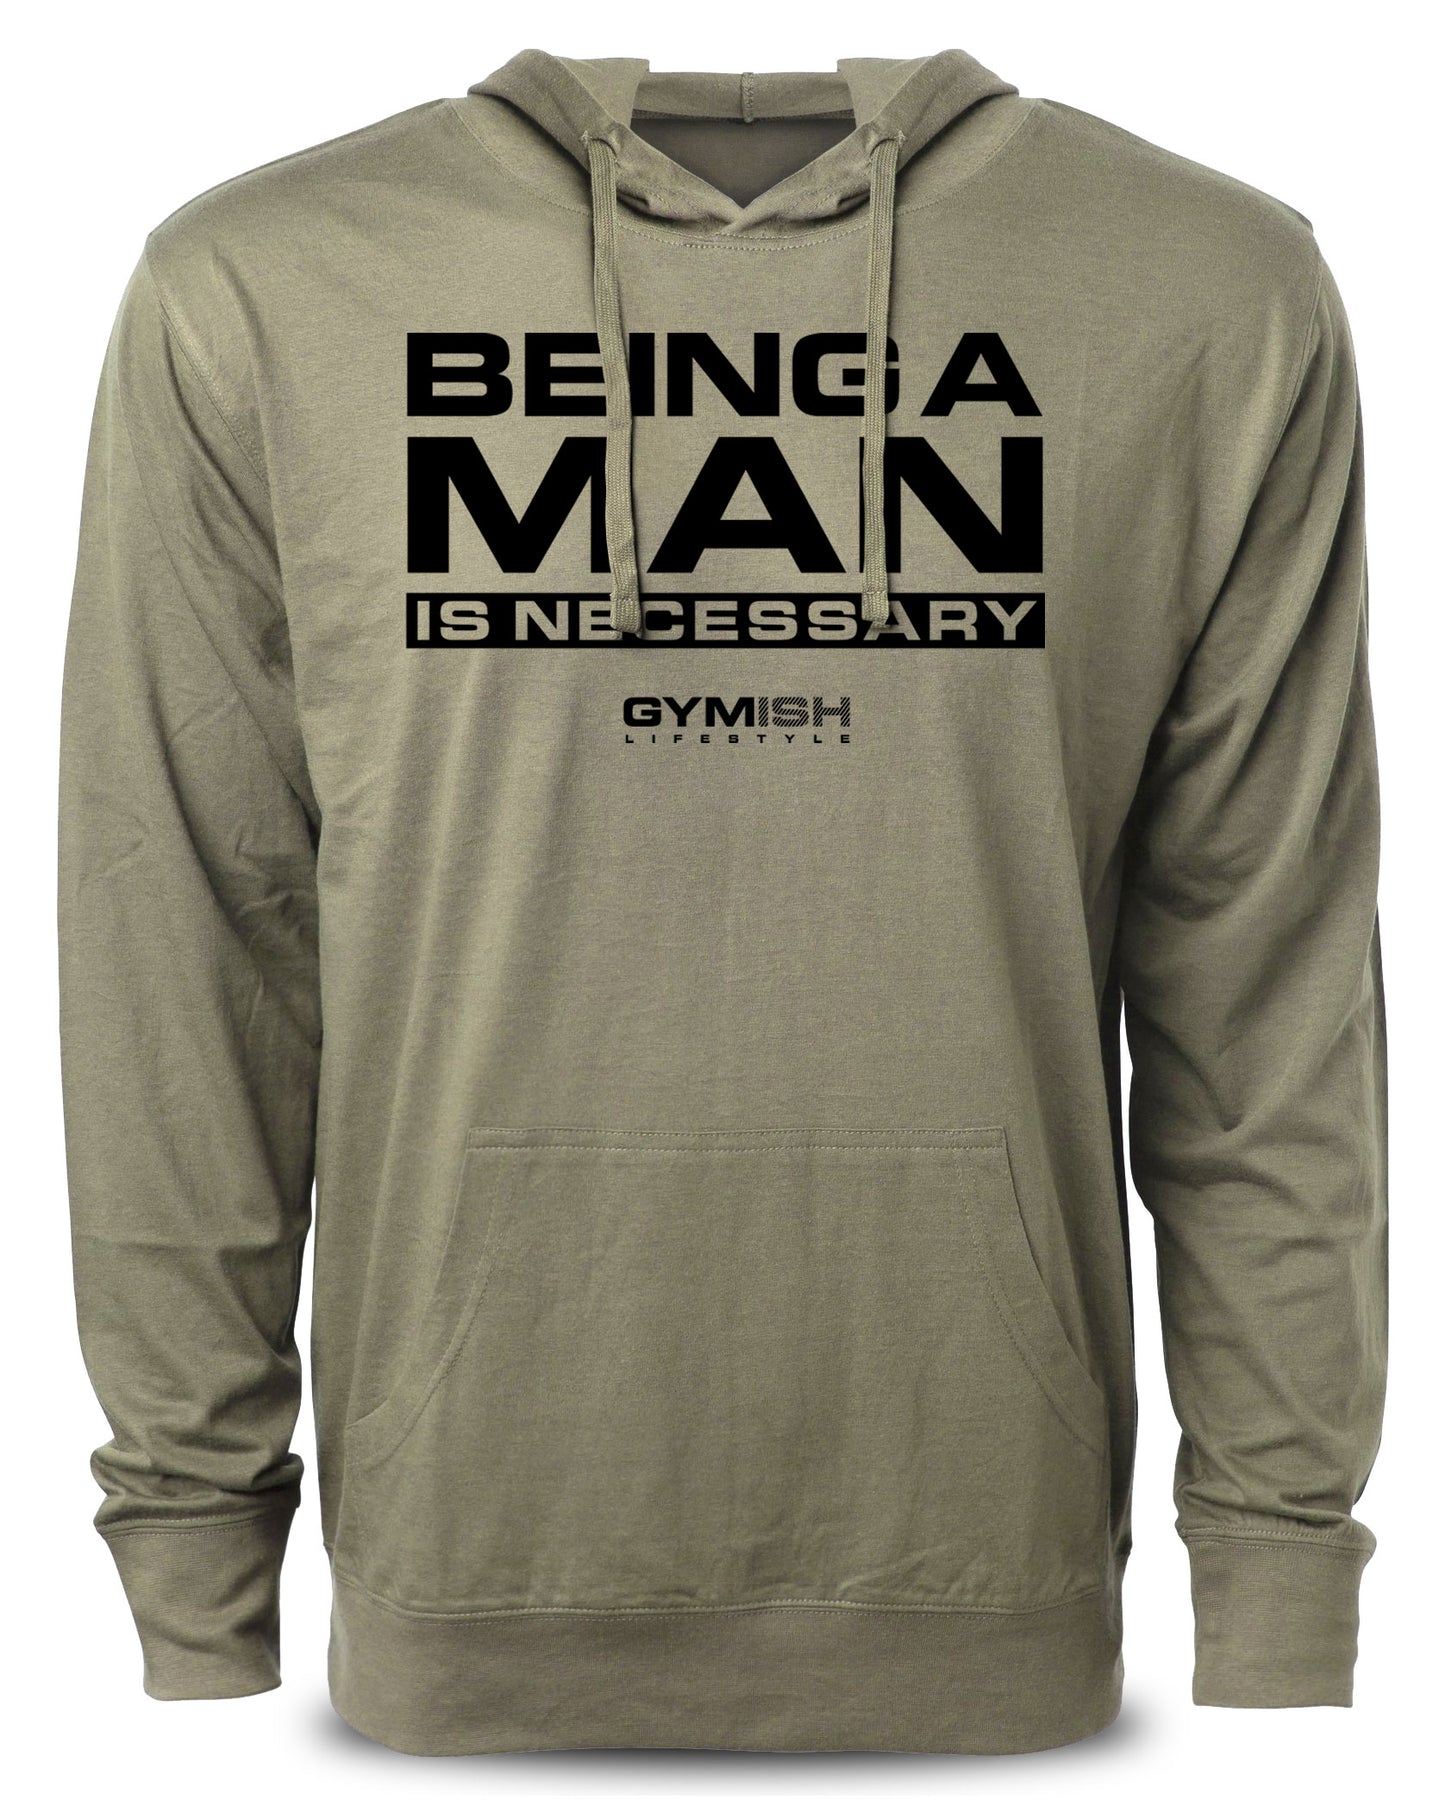 Being a Man is Necessary Workout Hoodies